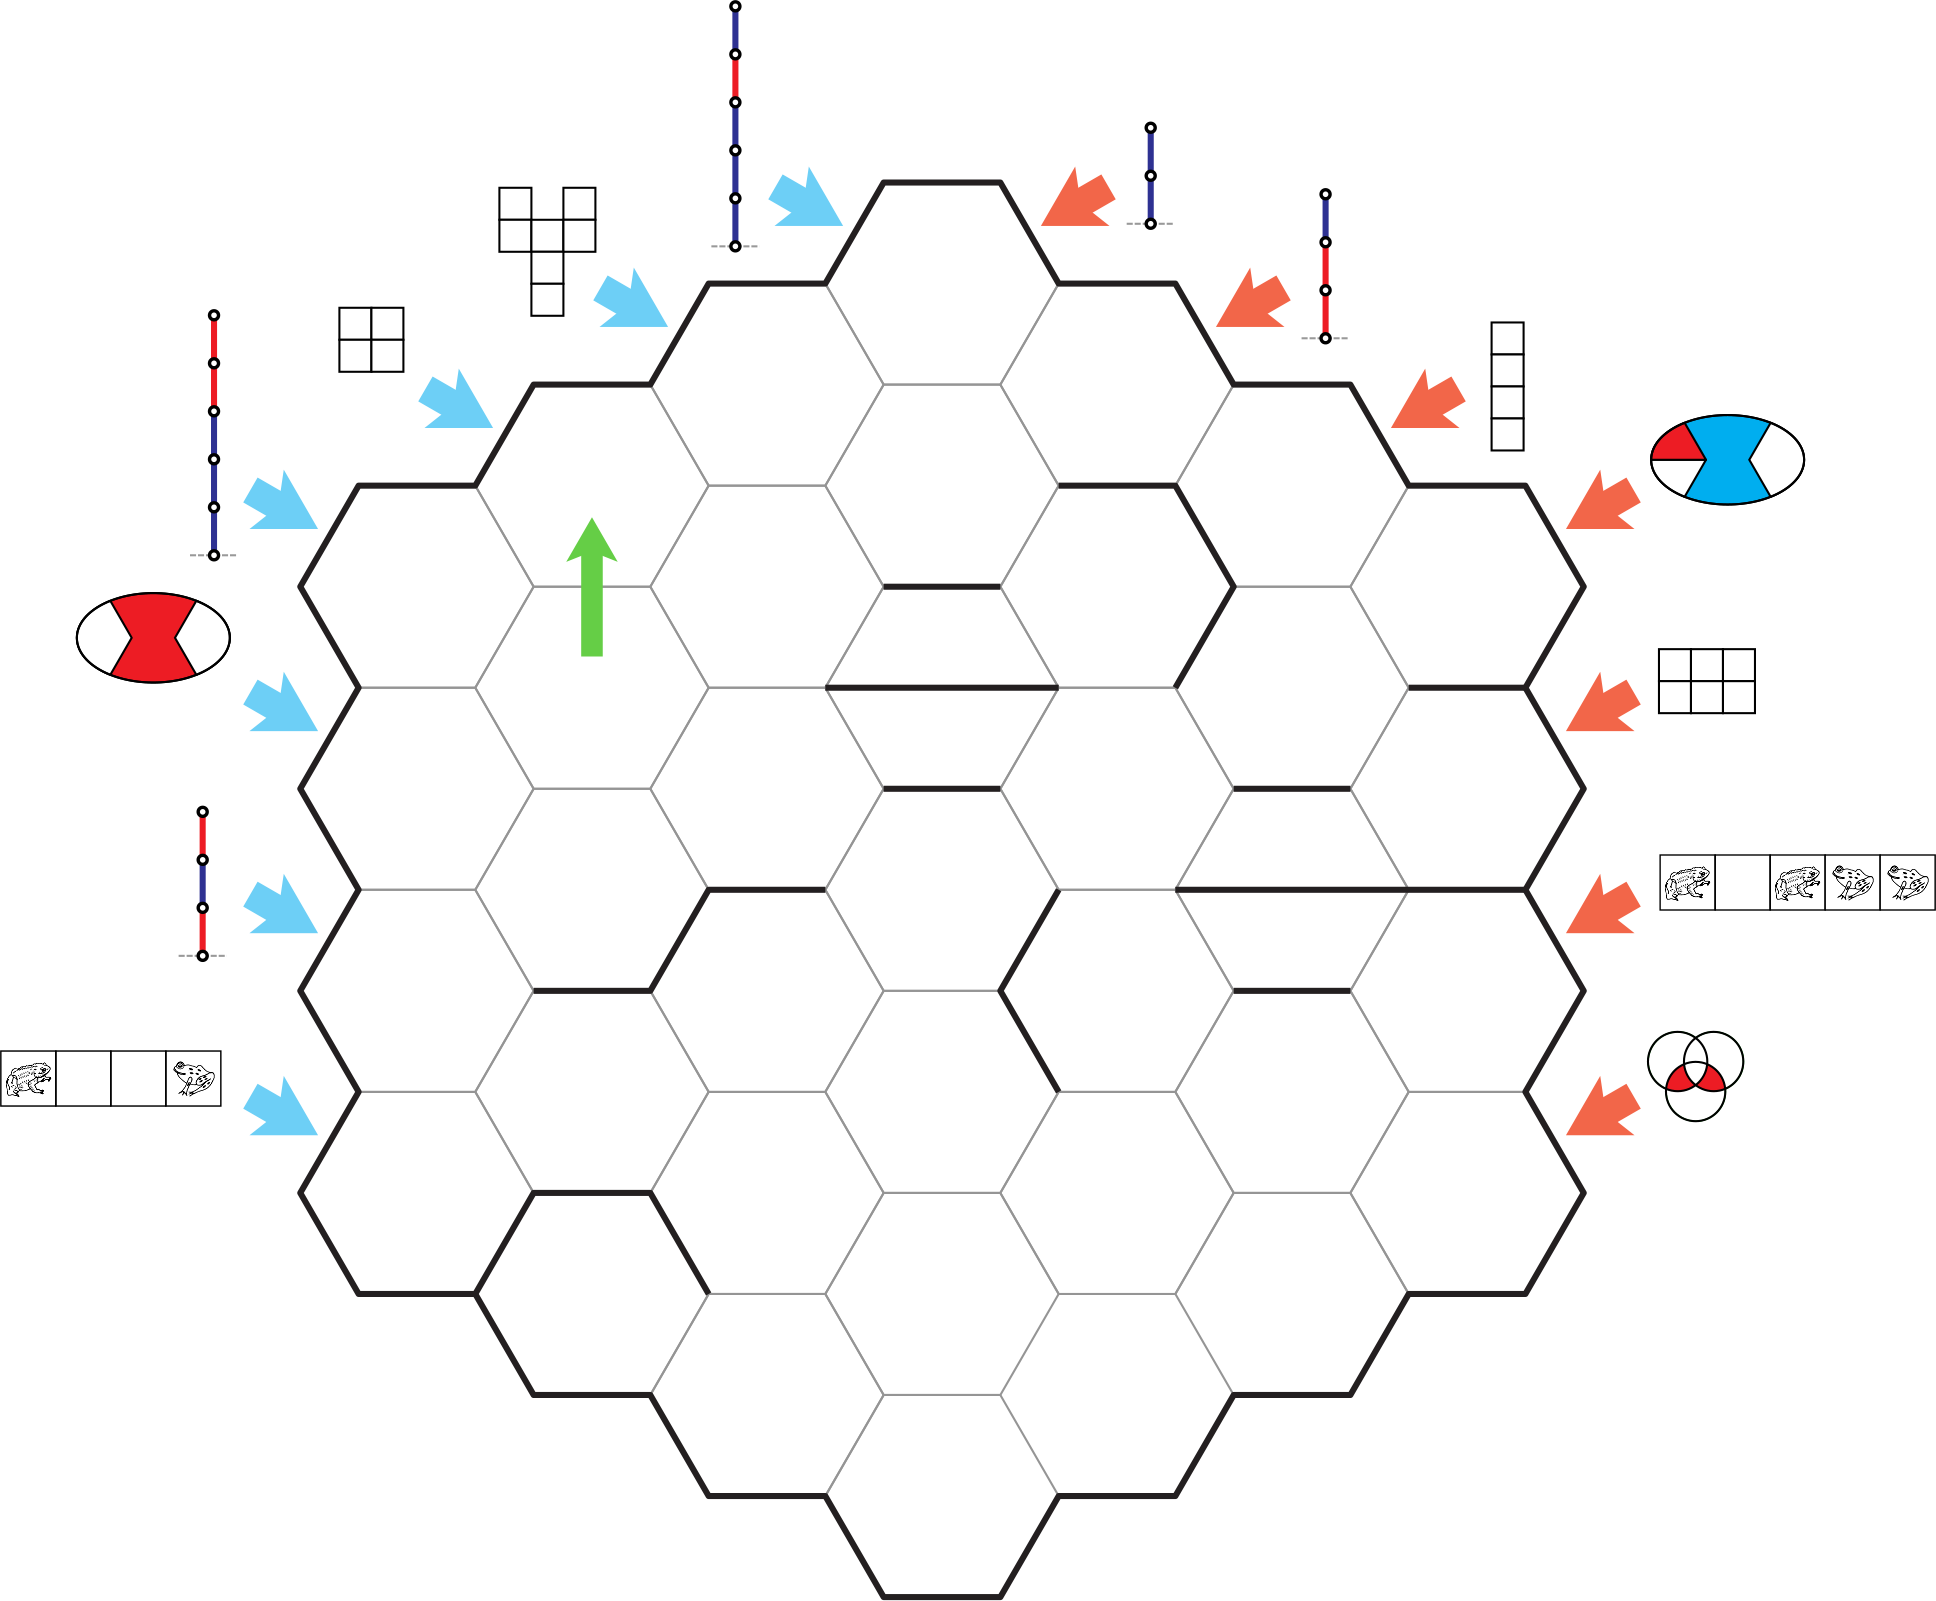 a hexagonal maze, with various games corresponding to each row of the grid